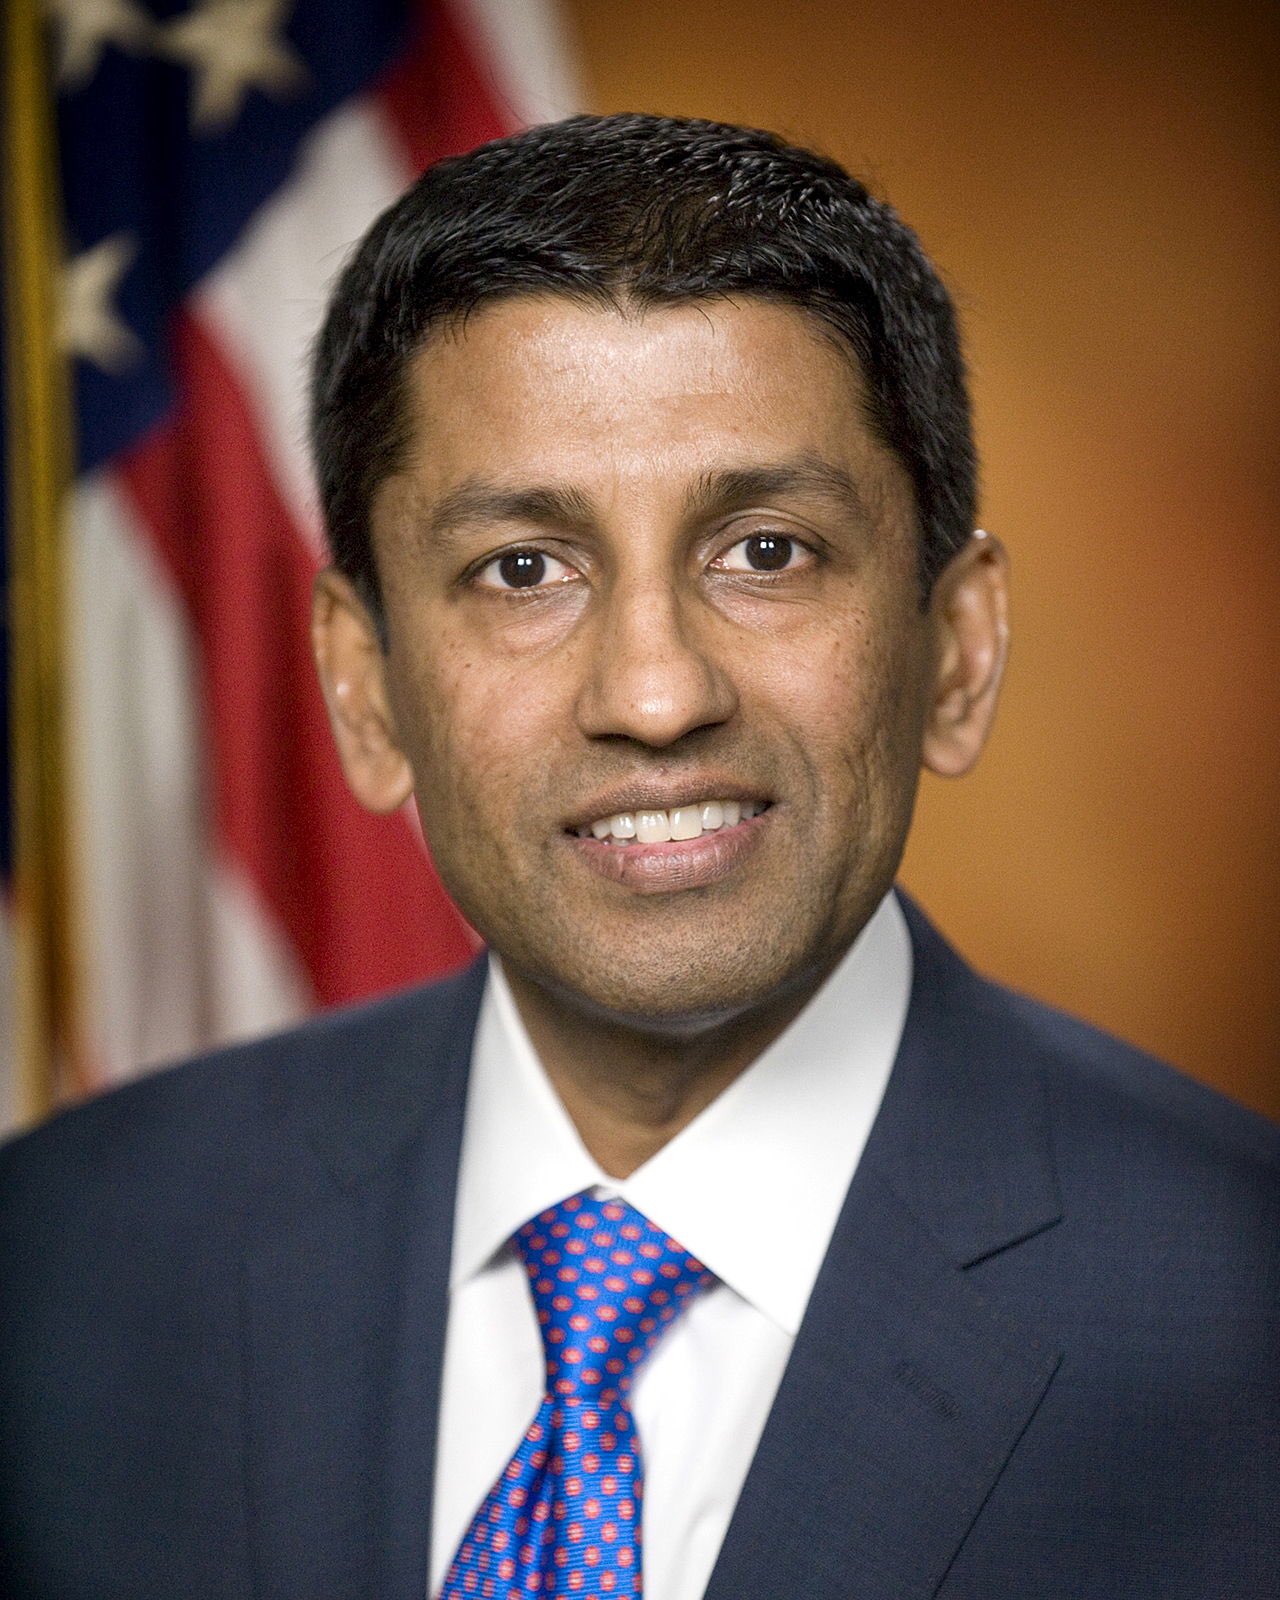 Judge Sri Srinivasan becomes first Indian-American to lead powerful federal circuit court